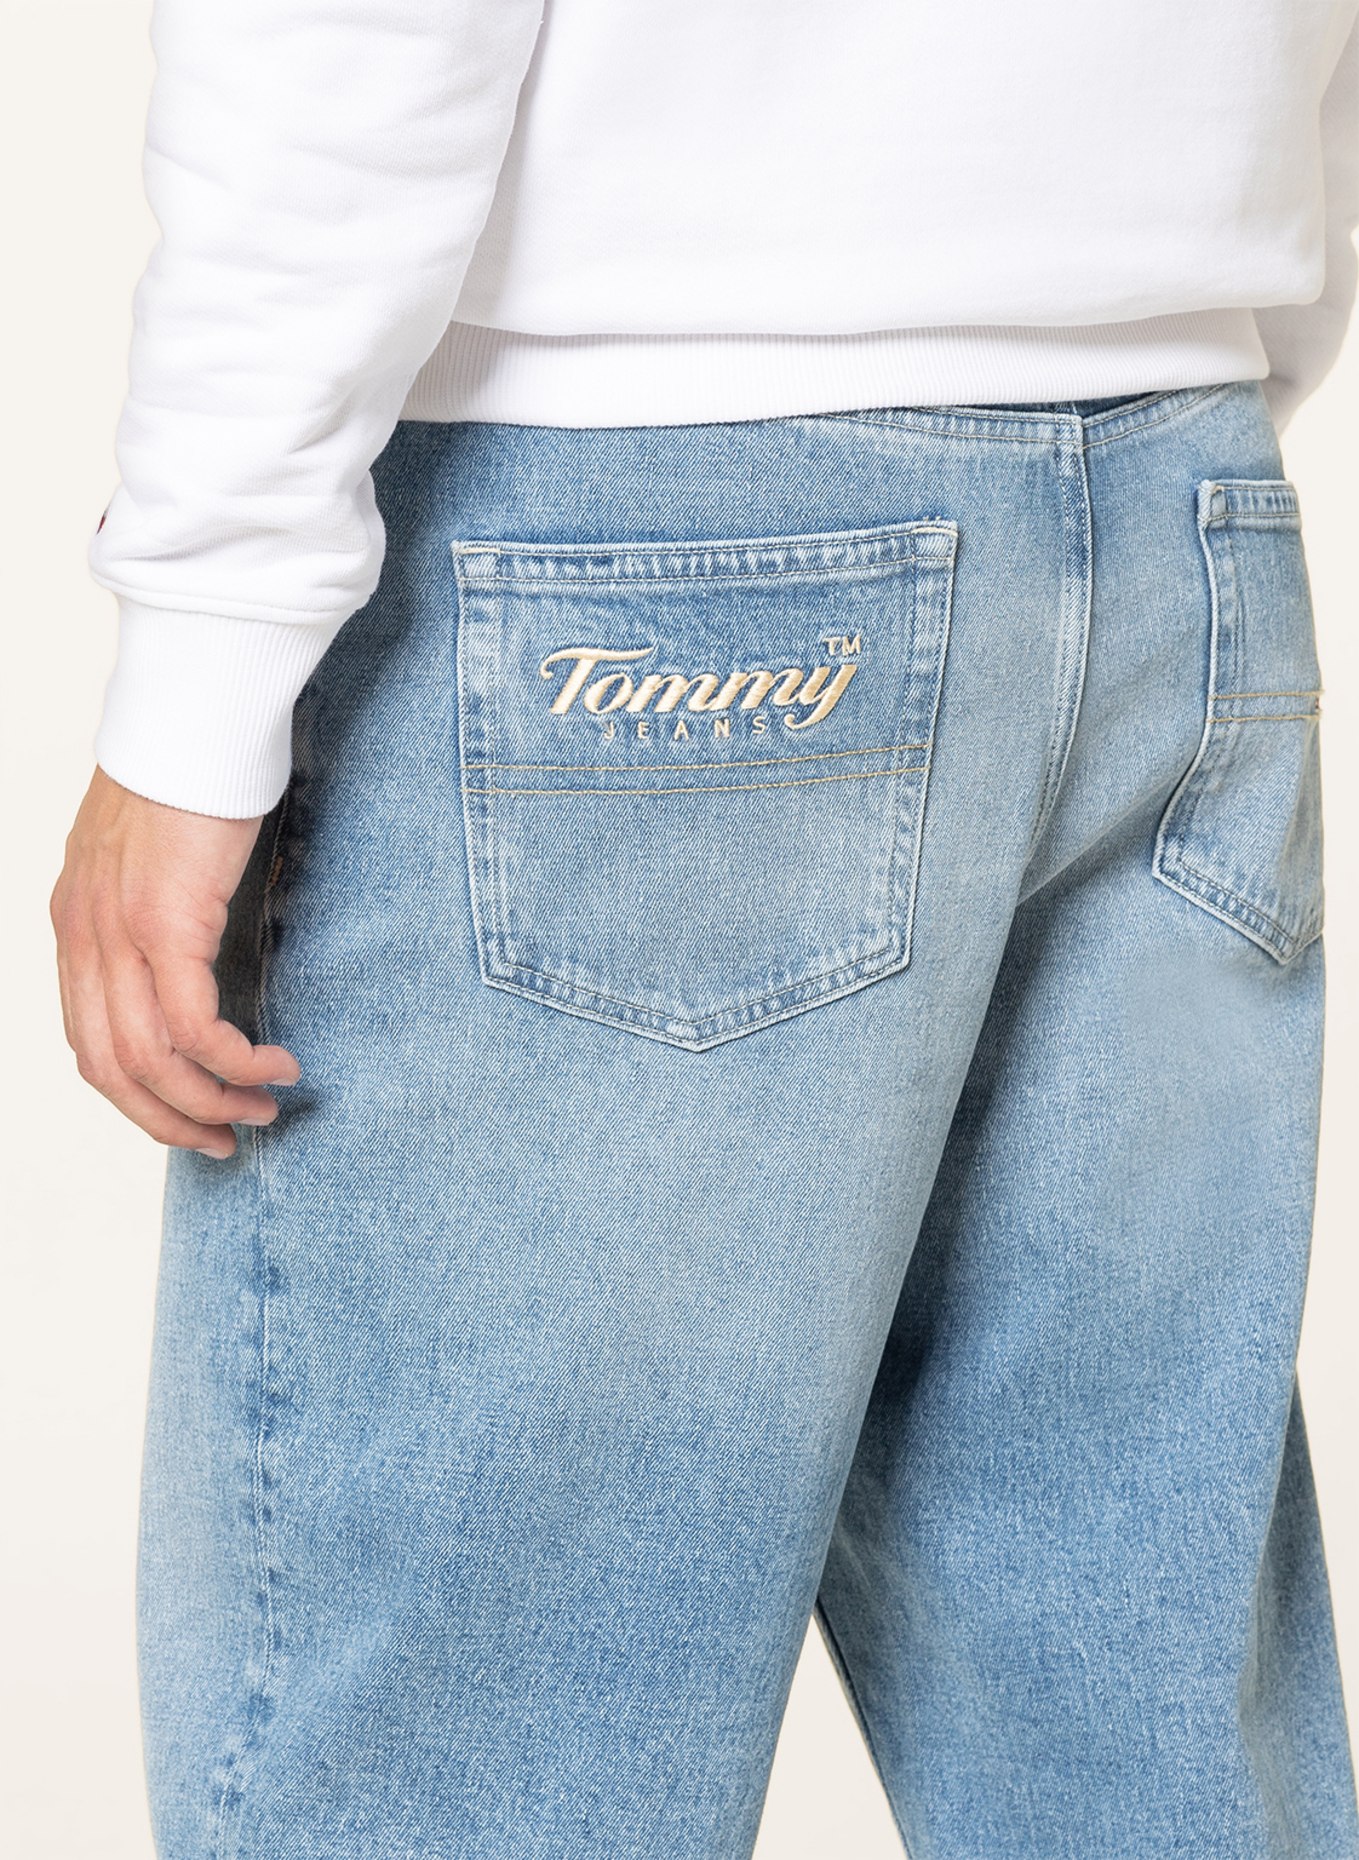 TOMMY JEANS Jeans BAX Loose Tapered Fit, Farbe: 1AB Denim Light (Bild 5)